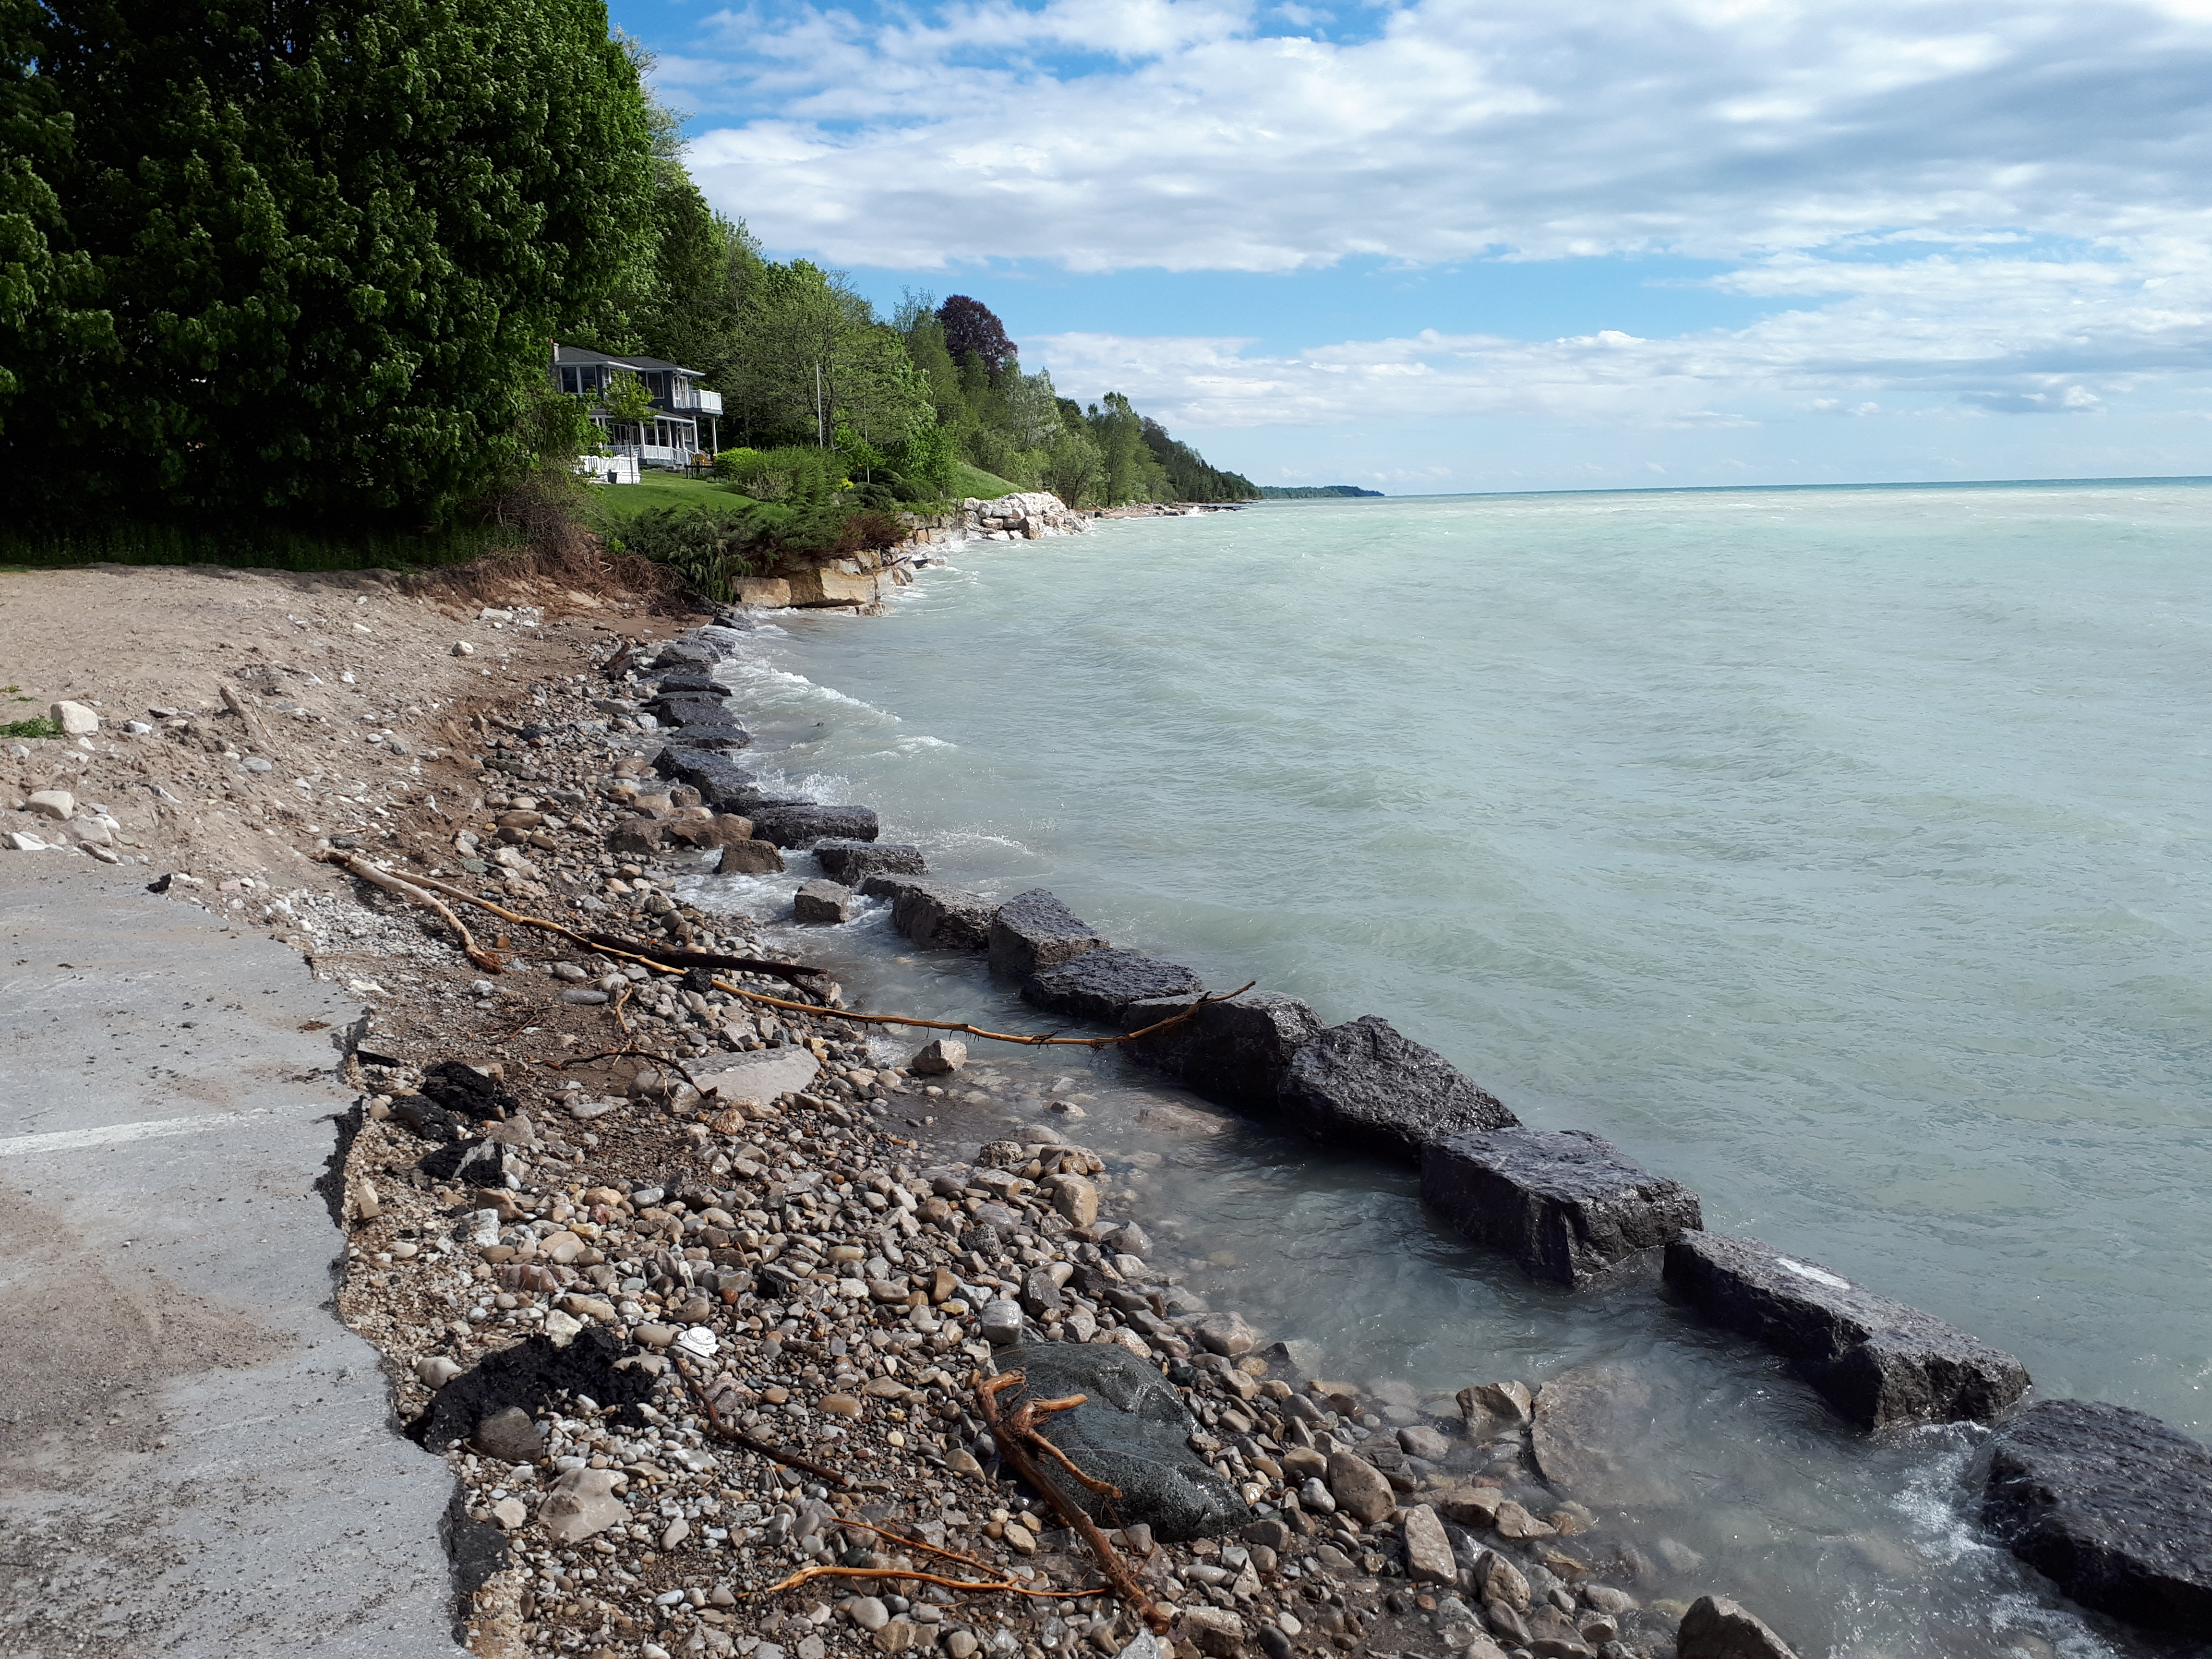 Local conservation authorities warn of bluff erosion risk